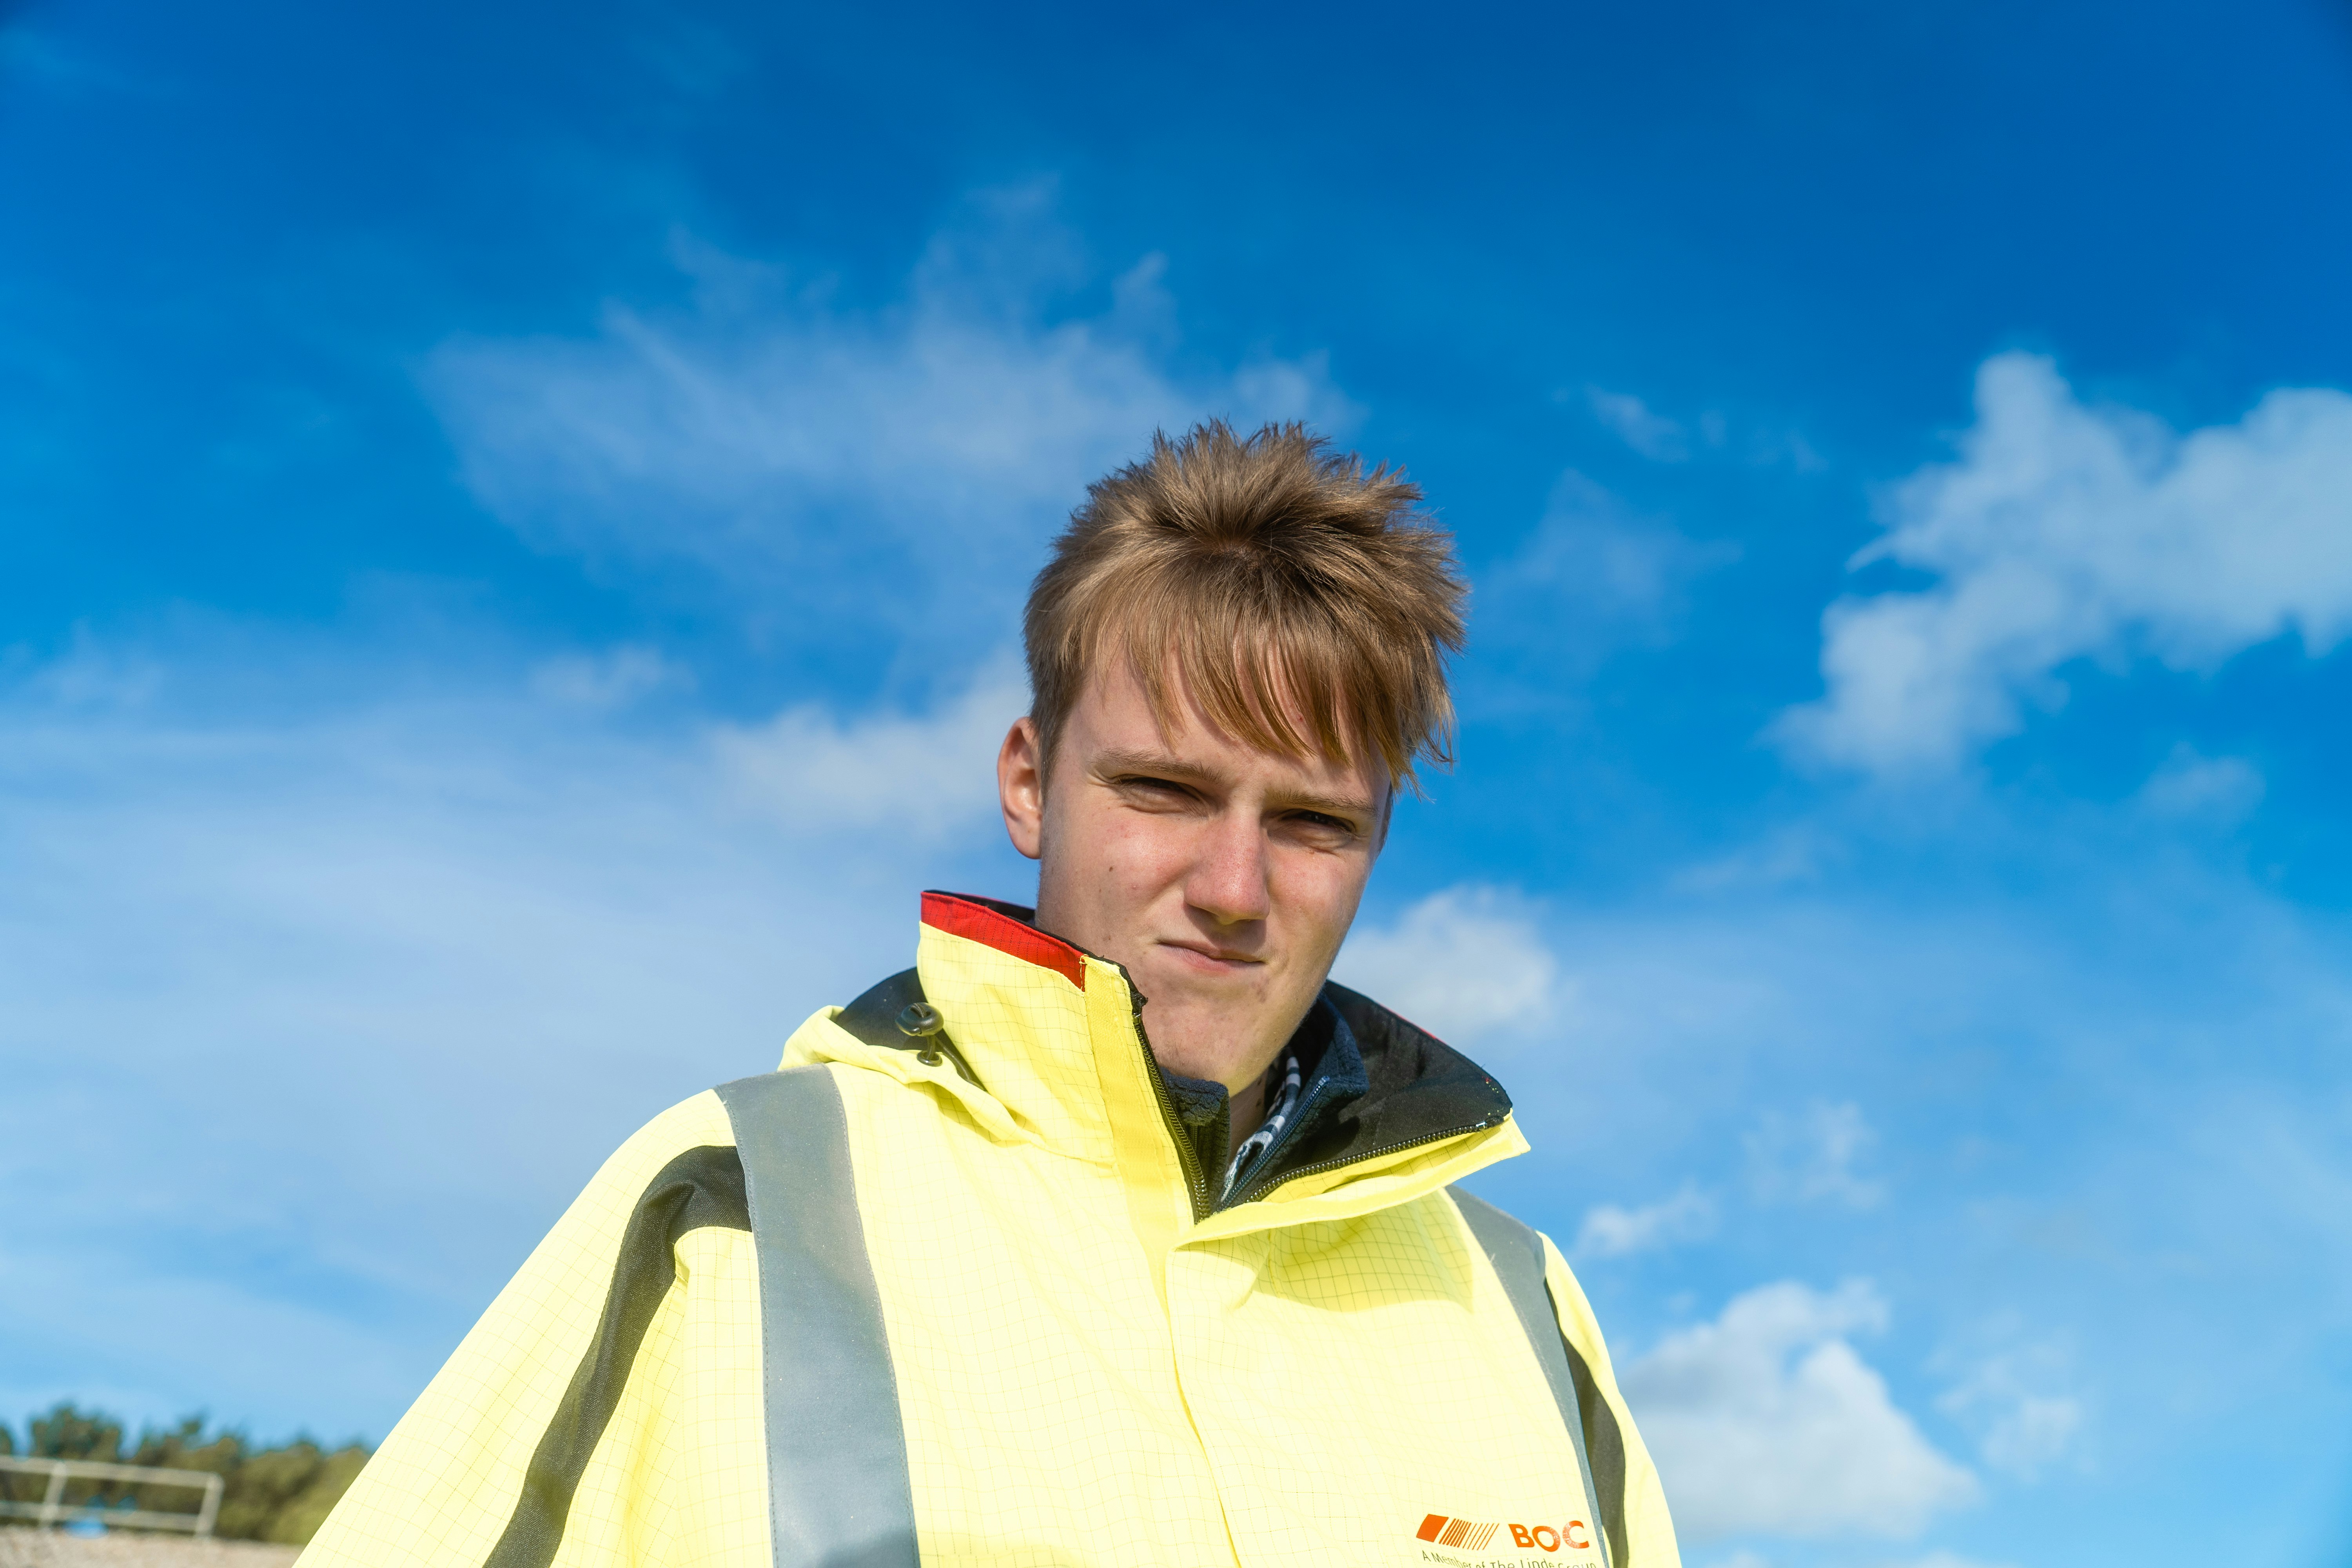 man in yellow and black zip up jacket under blue sky during daytime